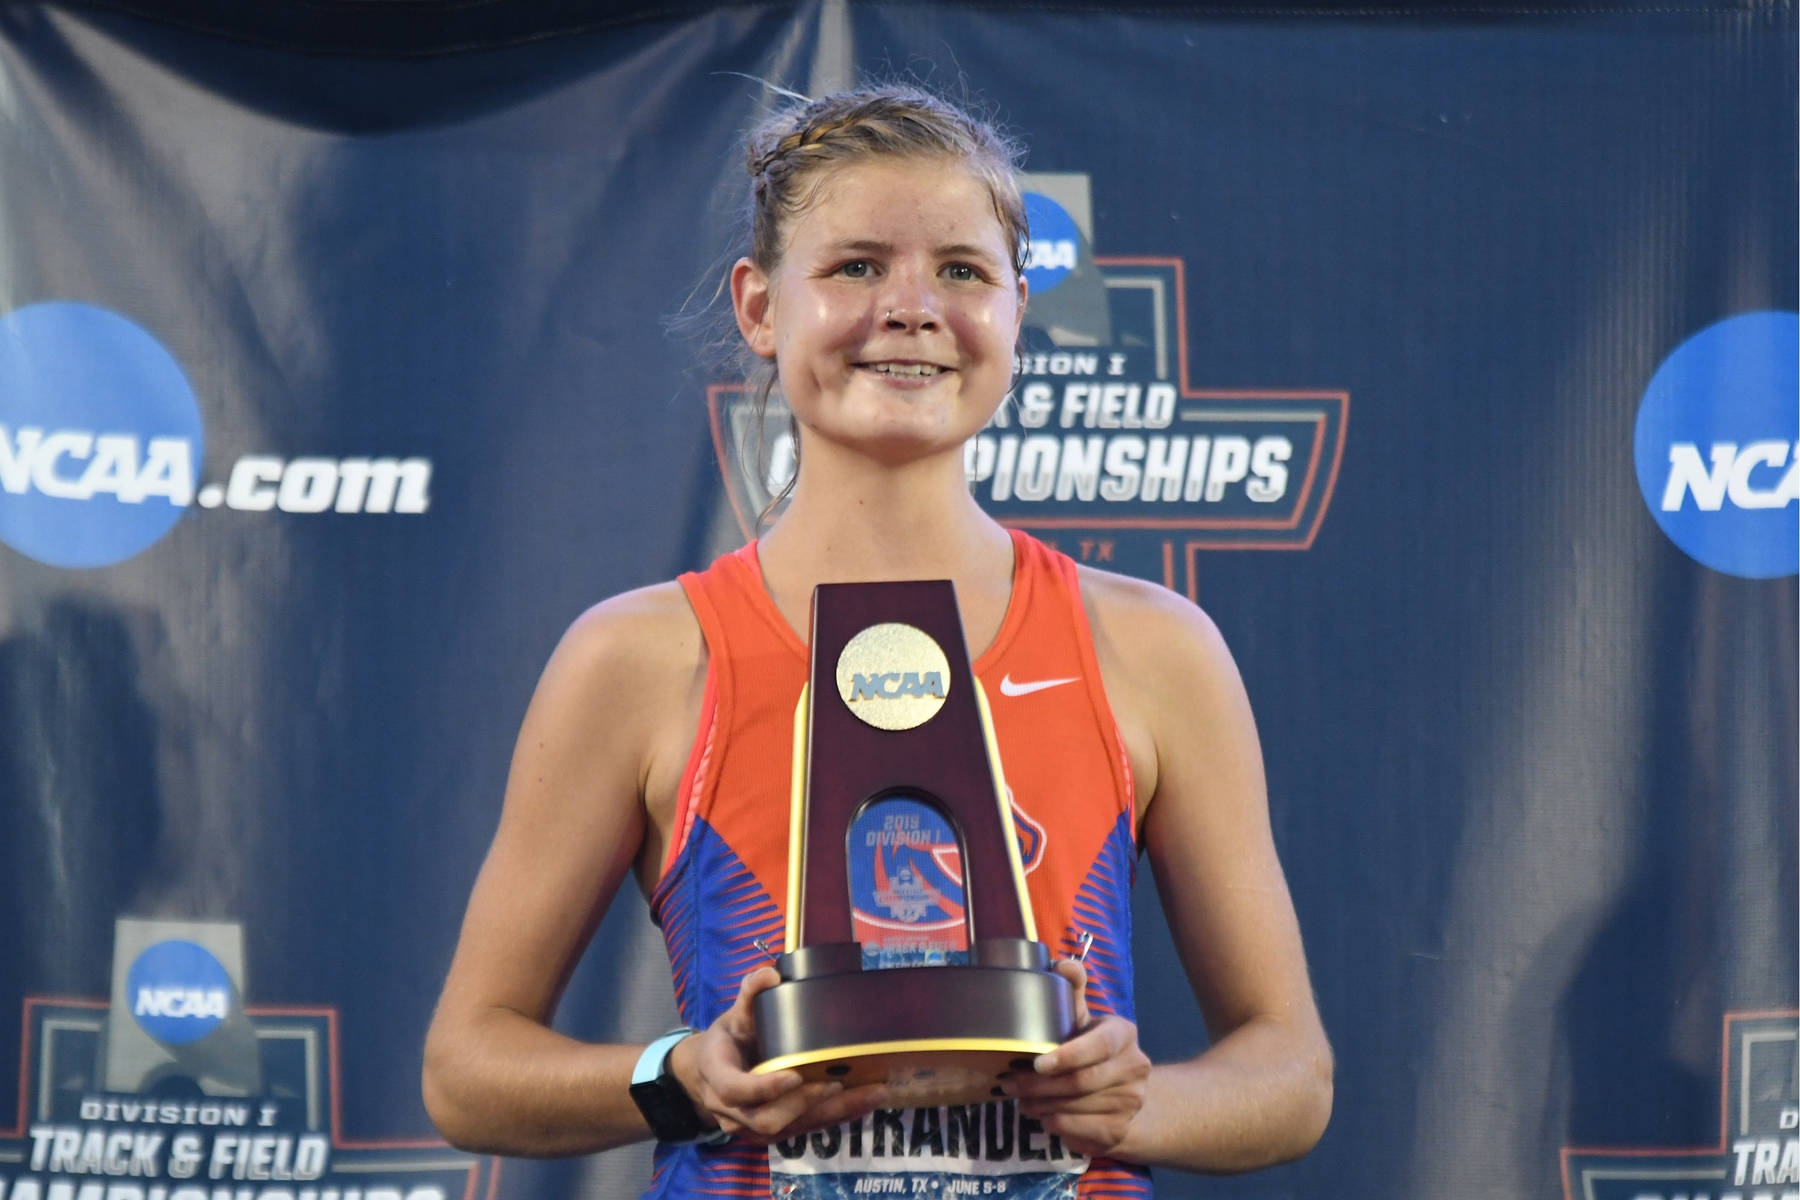 Ostrander falls ill, scratches from Pan Am games